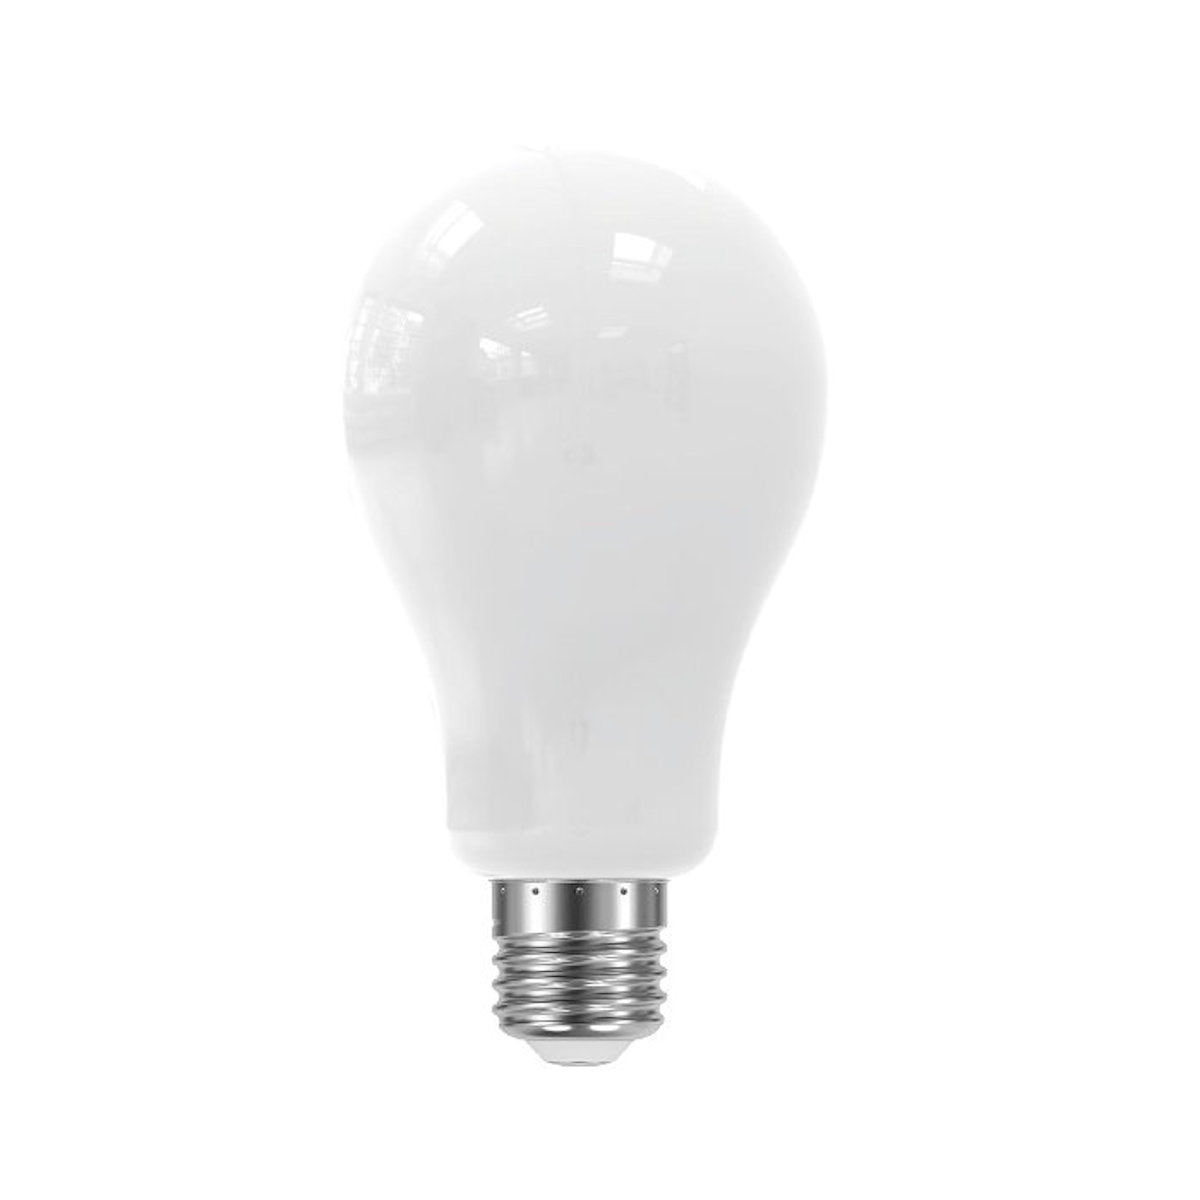 A60 8W E27 Dimmable LED Lamp (Pack Of 2)